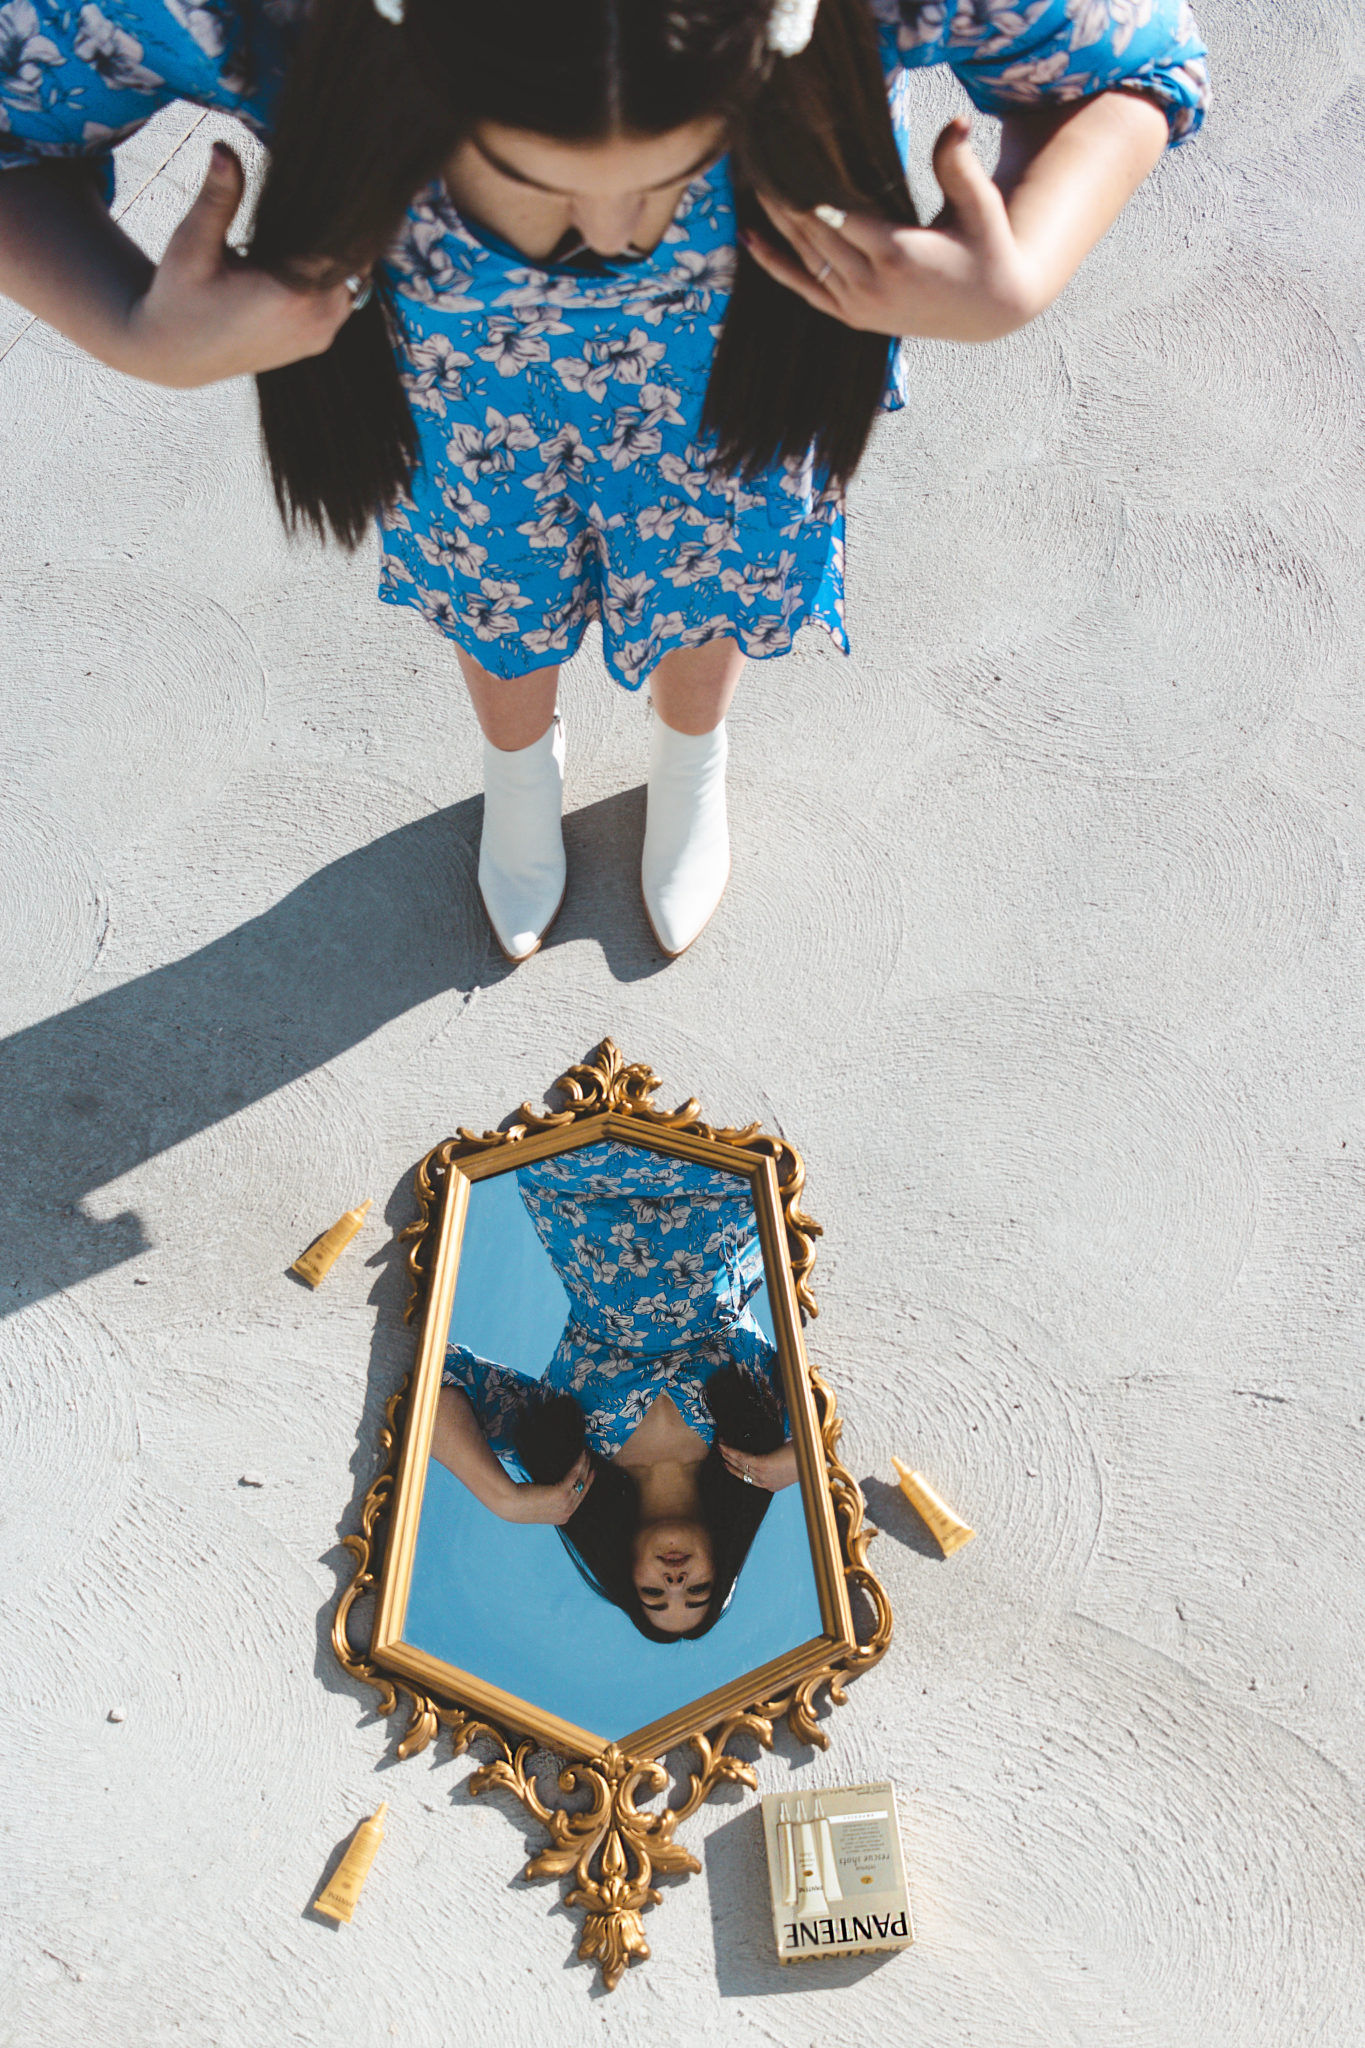 Lauryncakes in a long floral, blue dress and white boots looking into her reflection of a large gold mirror placed on the ground